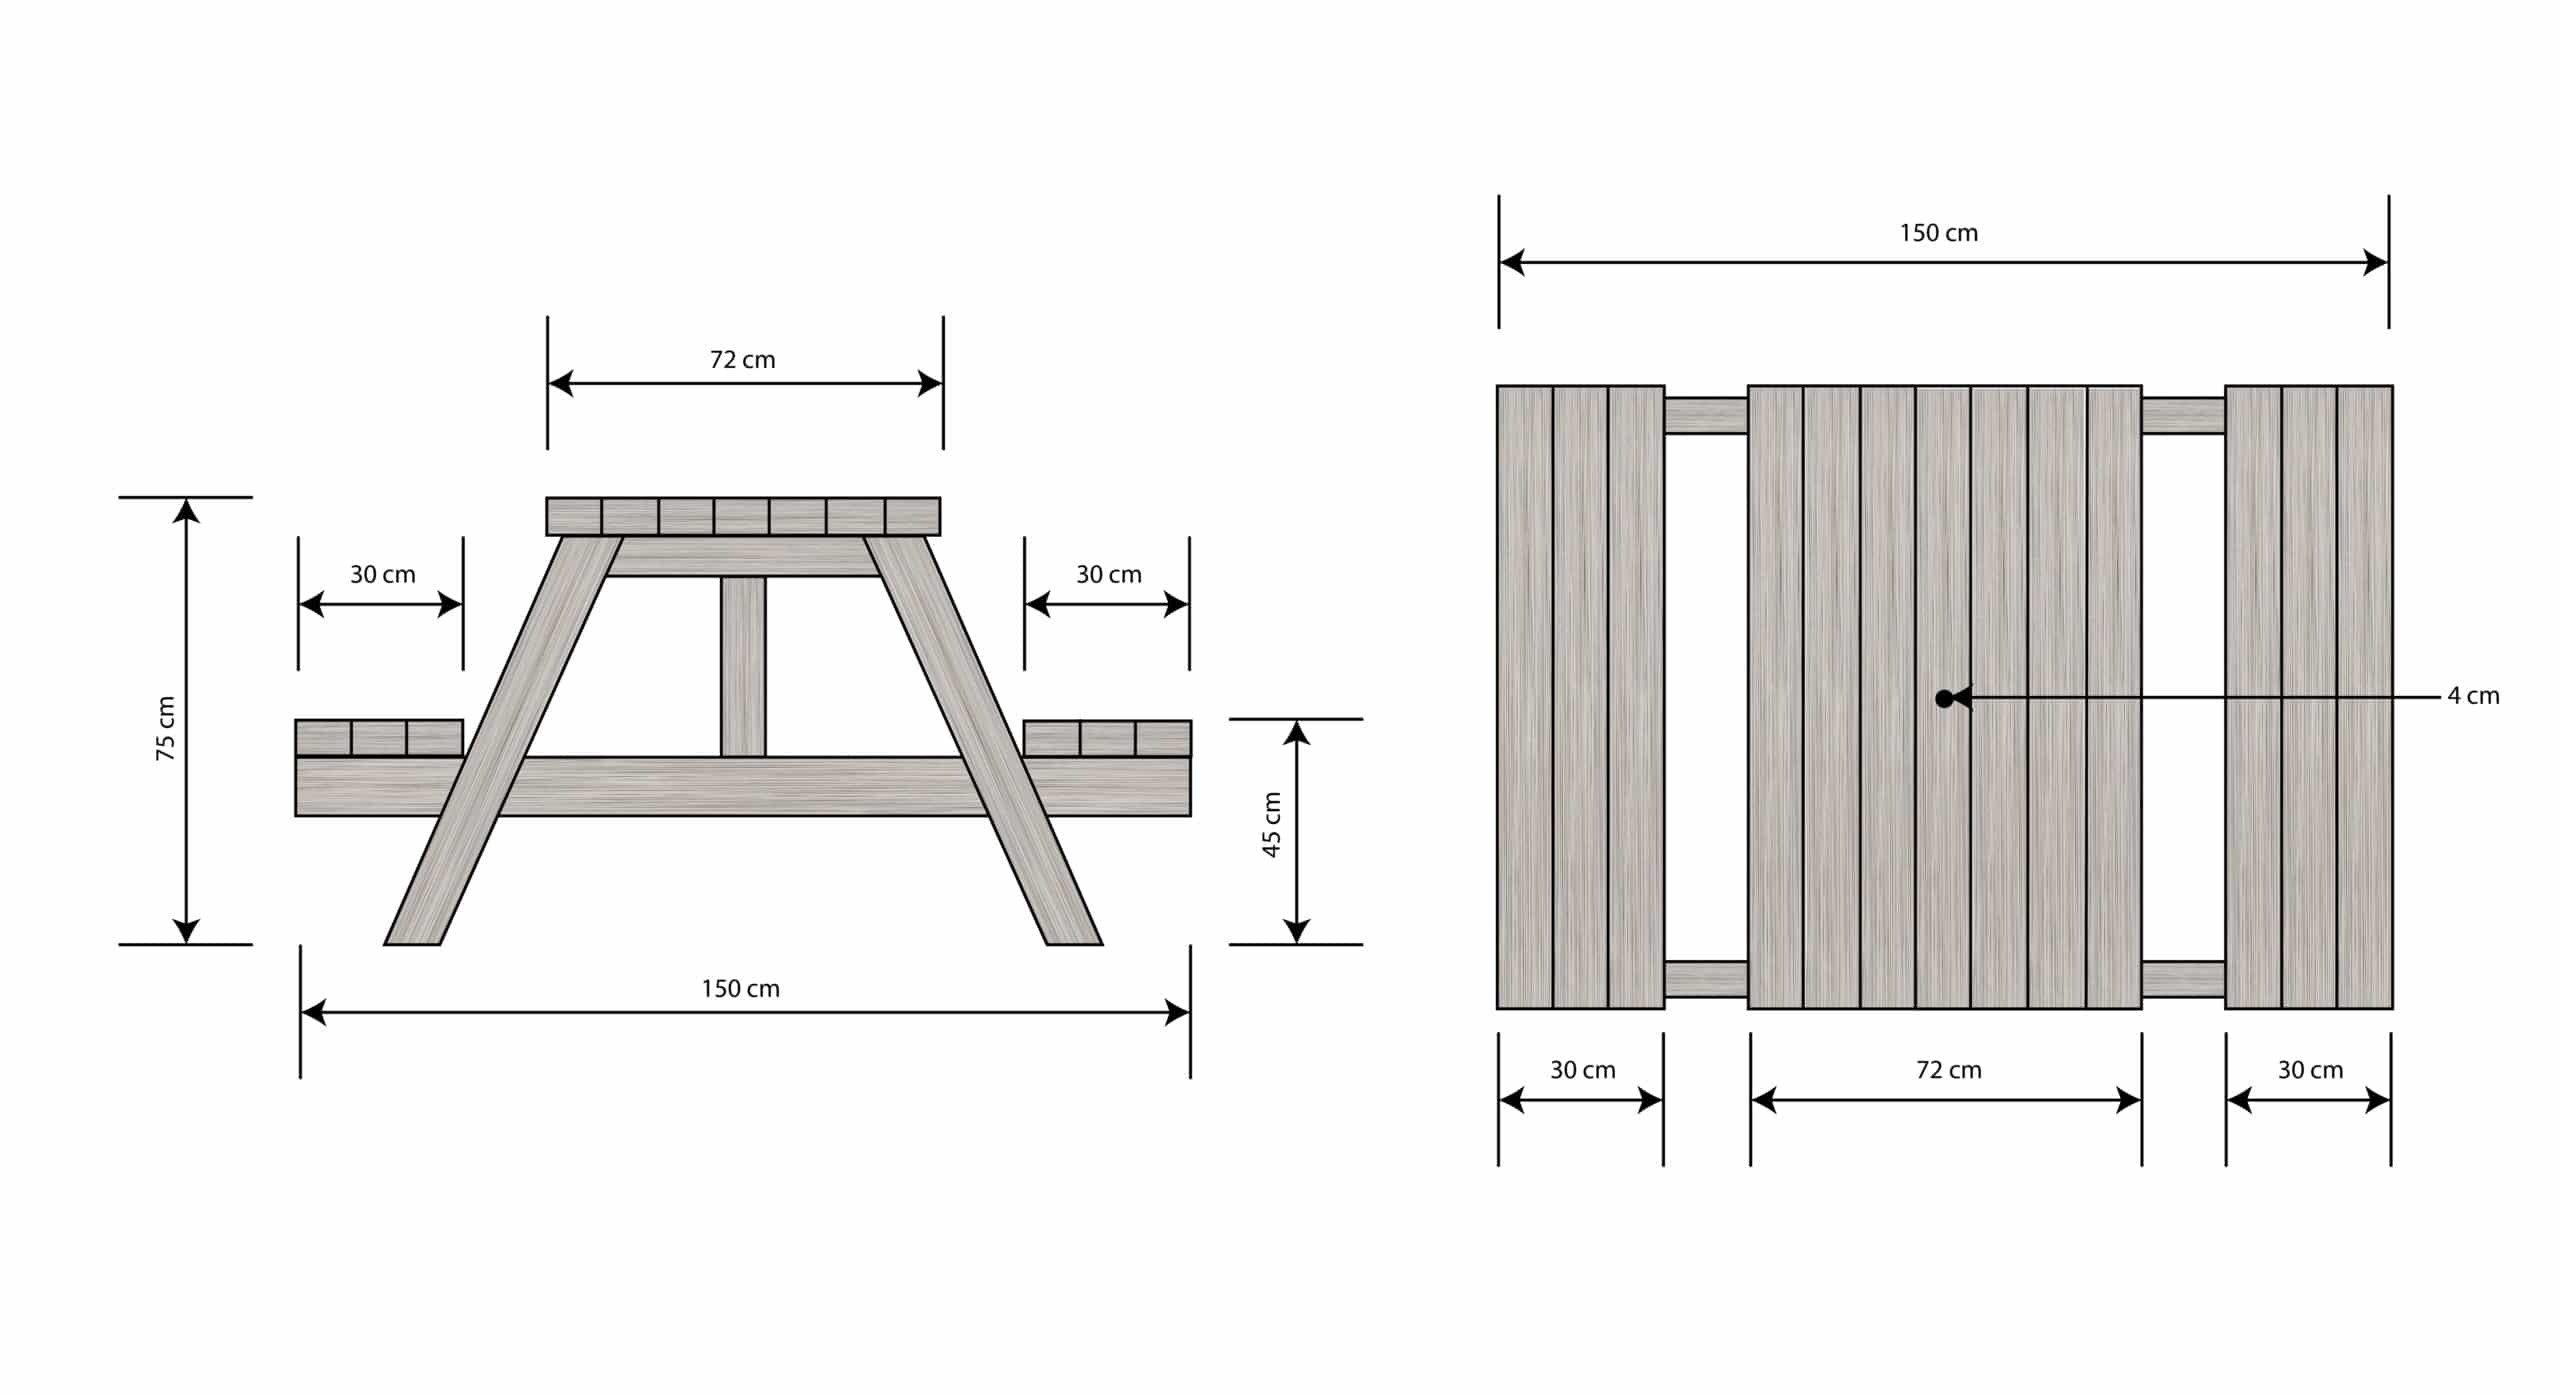 Structural diagram of wooden picnic table